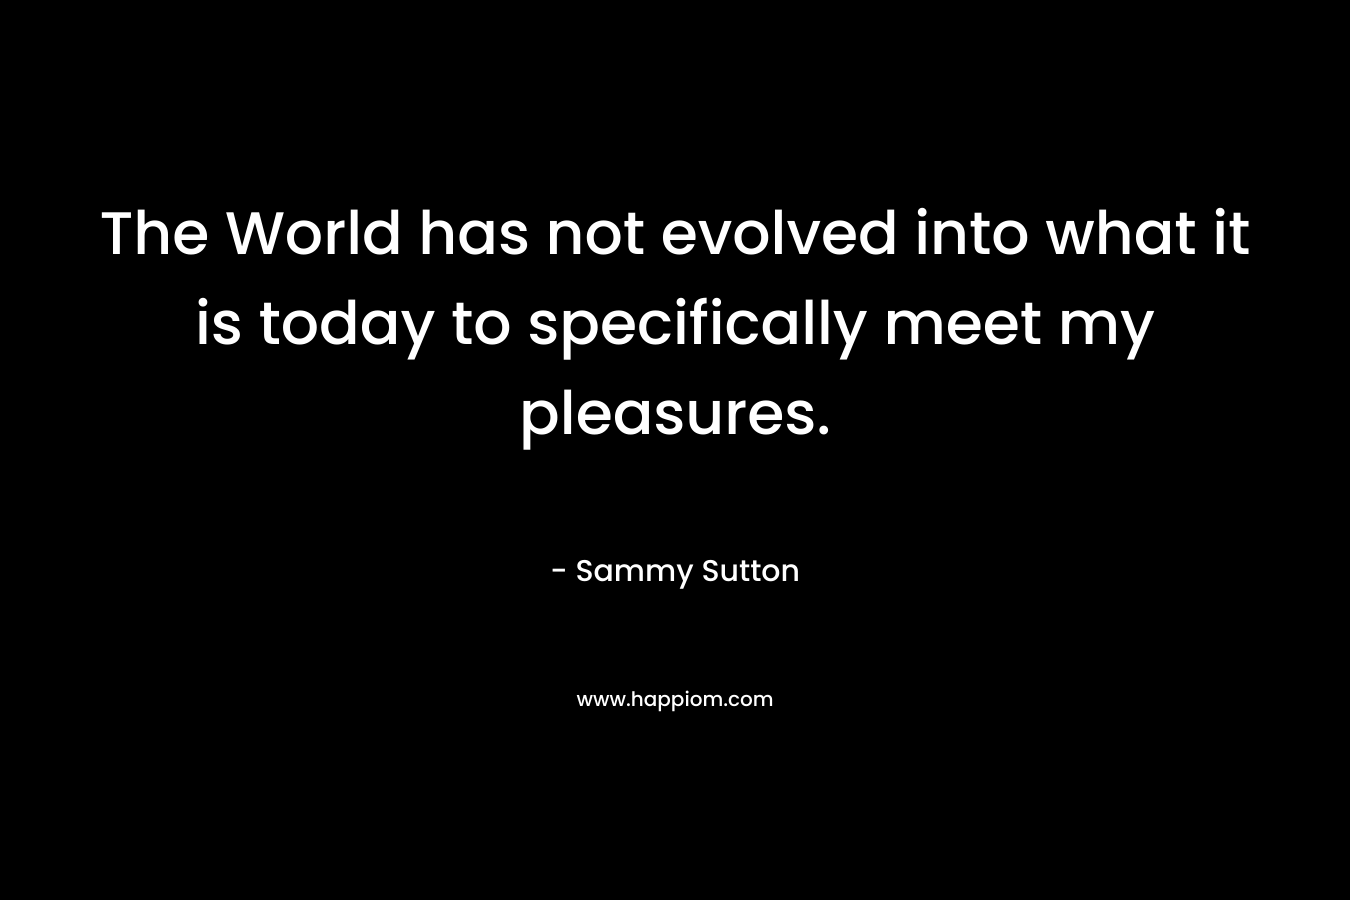 The World has not evolved into what it is today to specifically meet my pleasures.